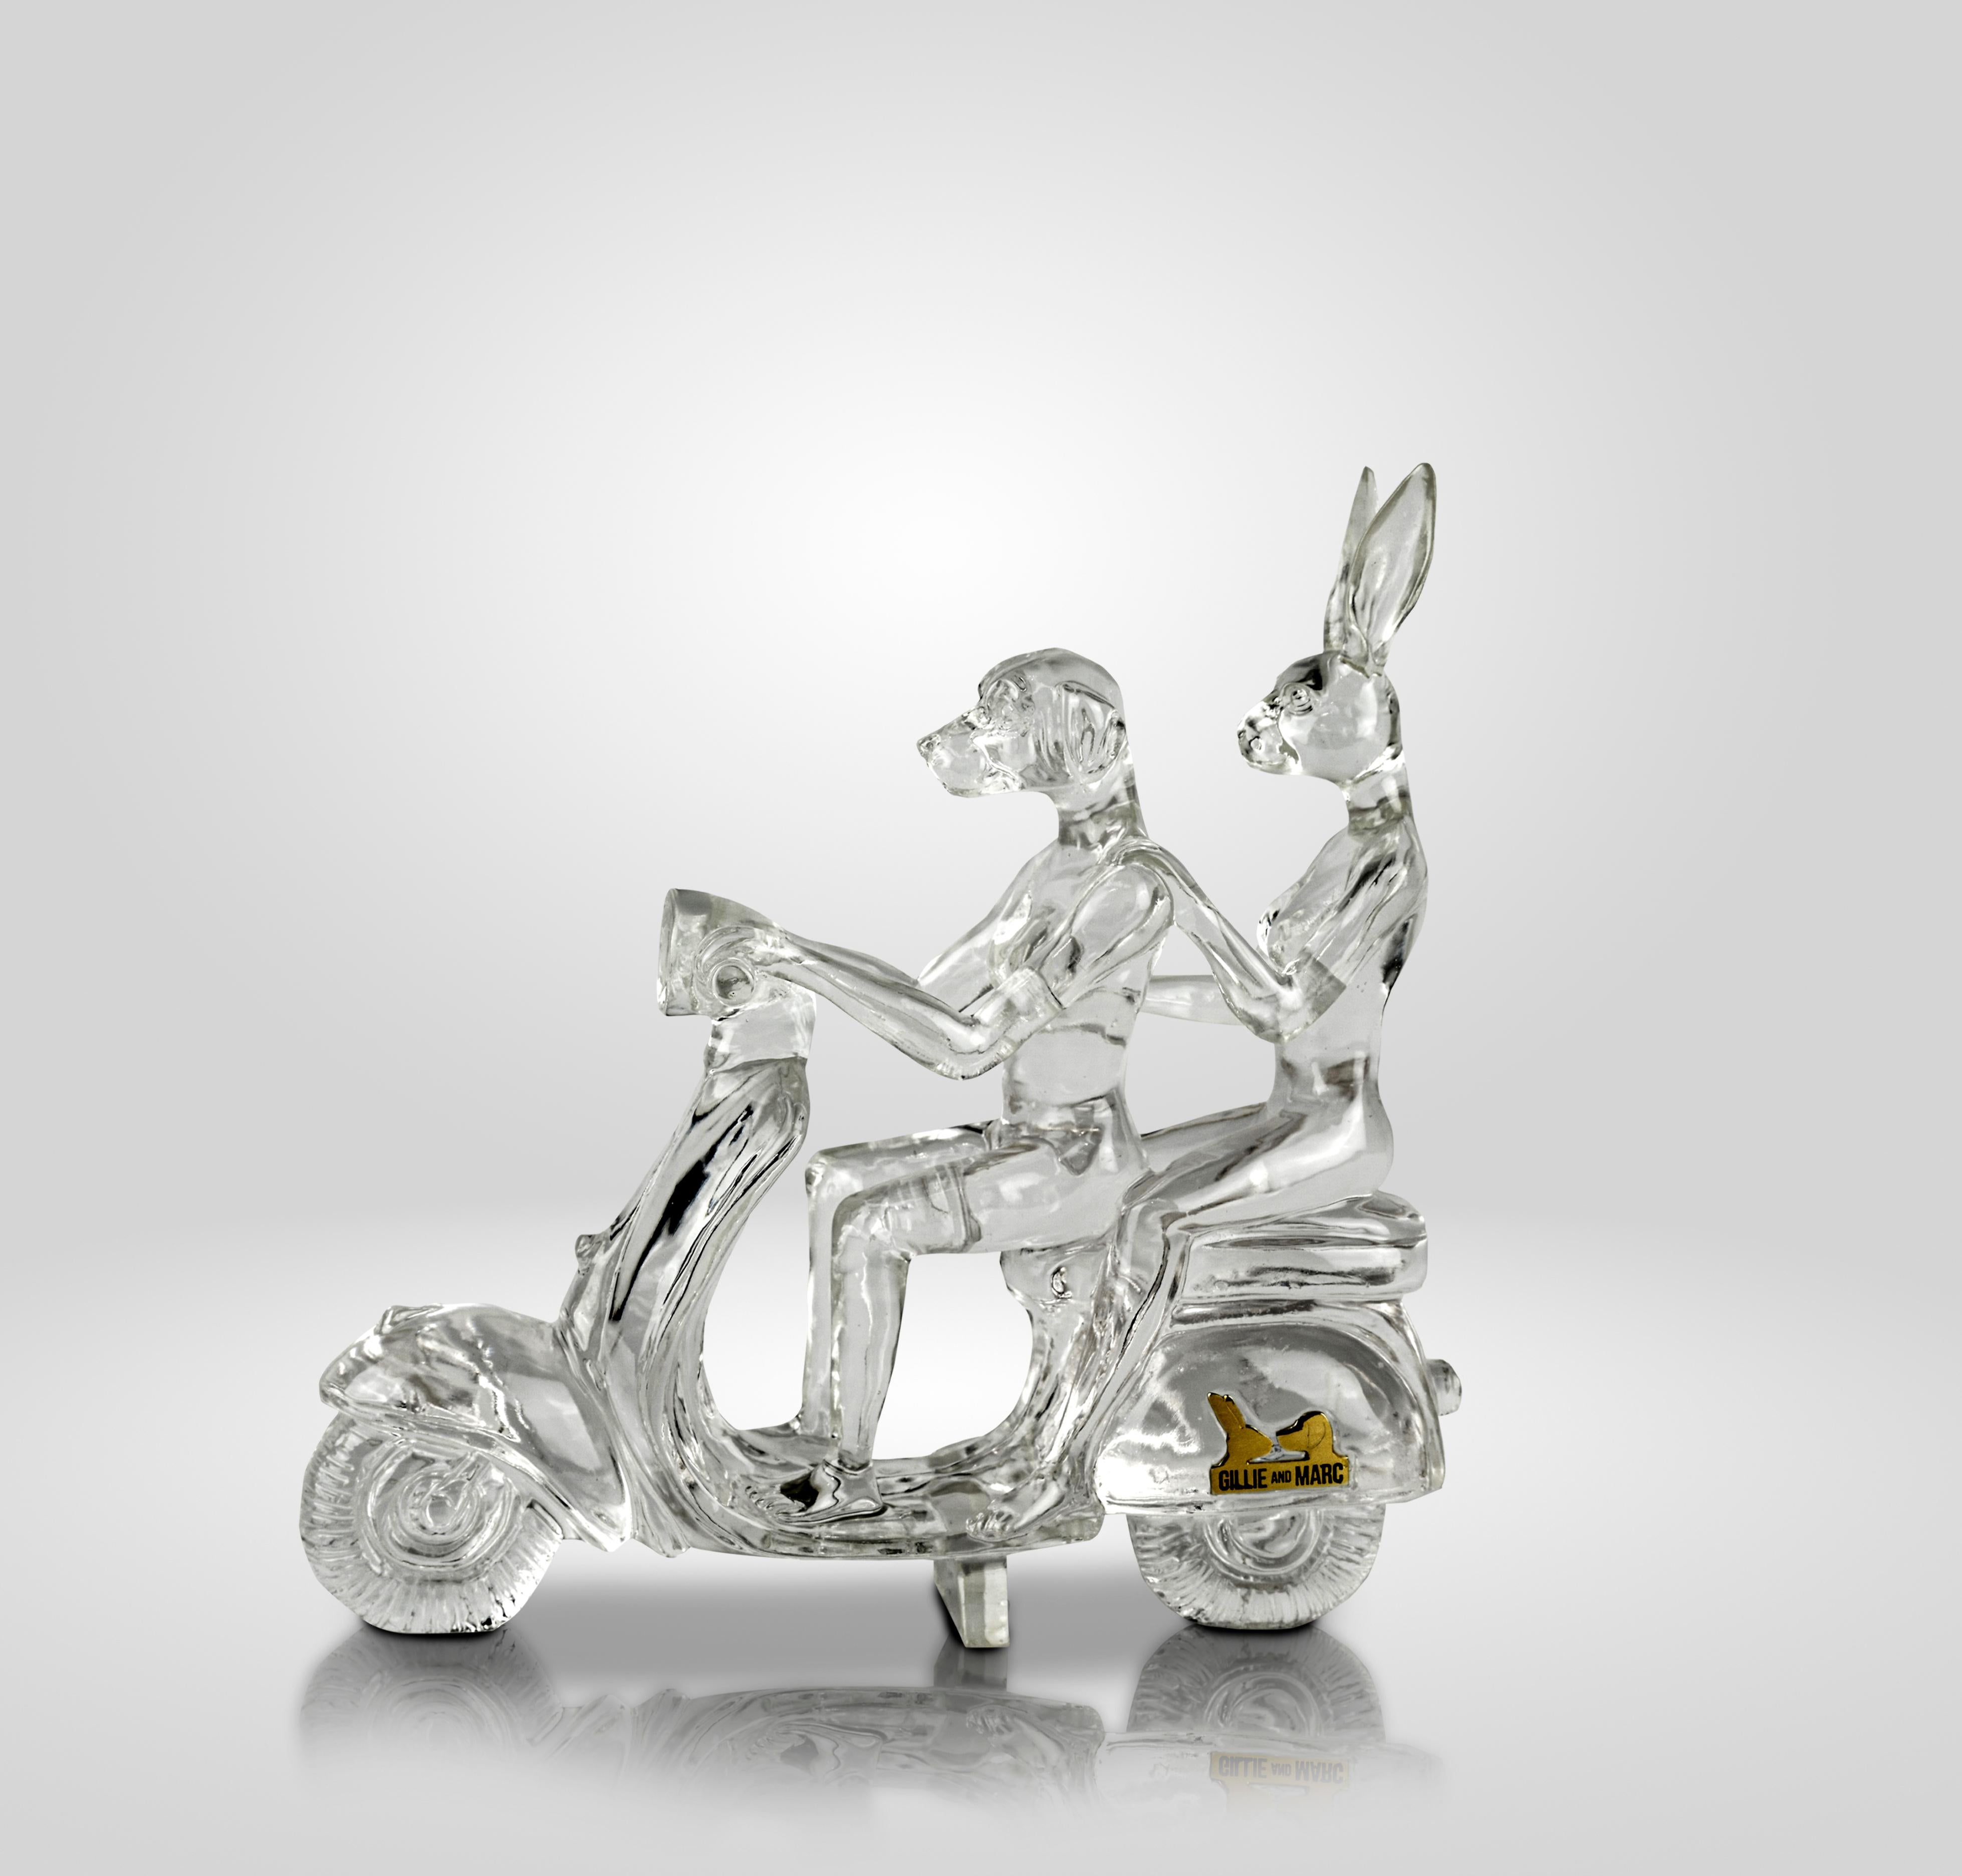 Authentic Clear Resin Lolly happy mini vespa riders Sculpture by Gillie and Marc - Gray Figurative Sculpture by Gillie and Marc Schattner